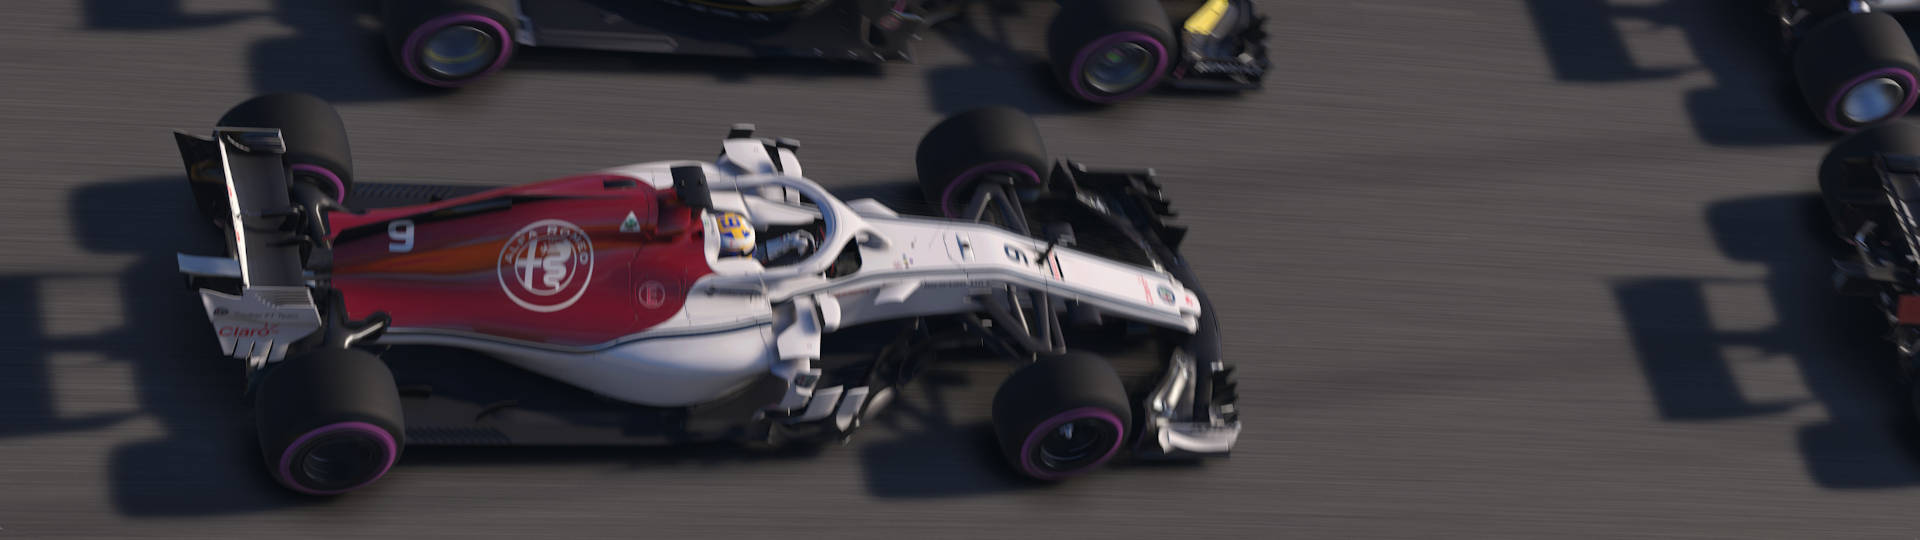 Codemasters F1 Racing Games Removed from Steam slice